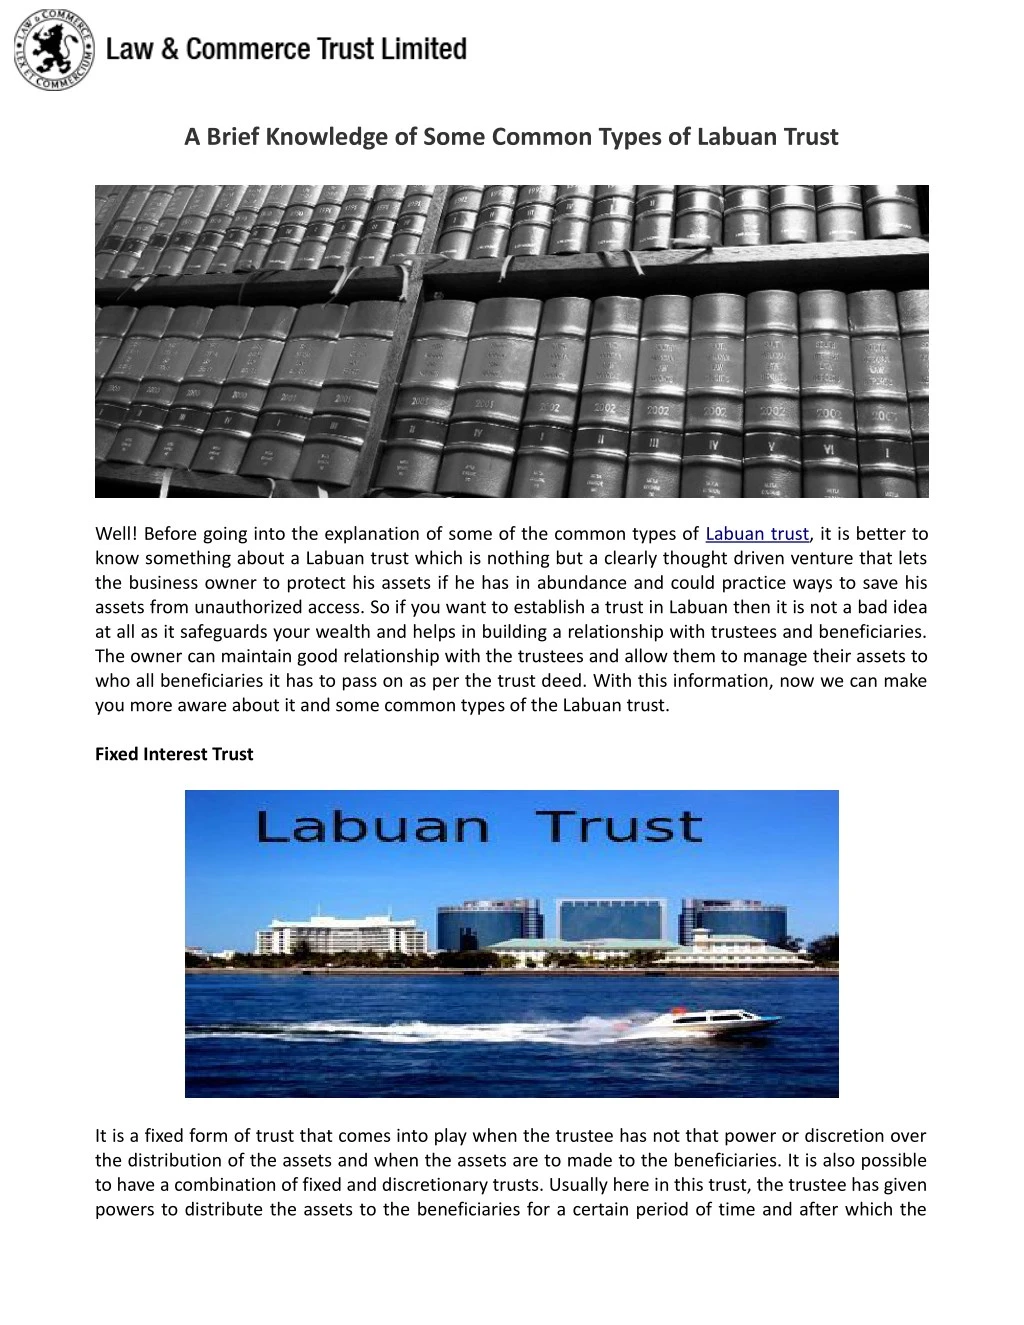 a brief knowledge of some common types of labuan